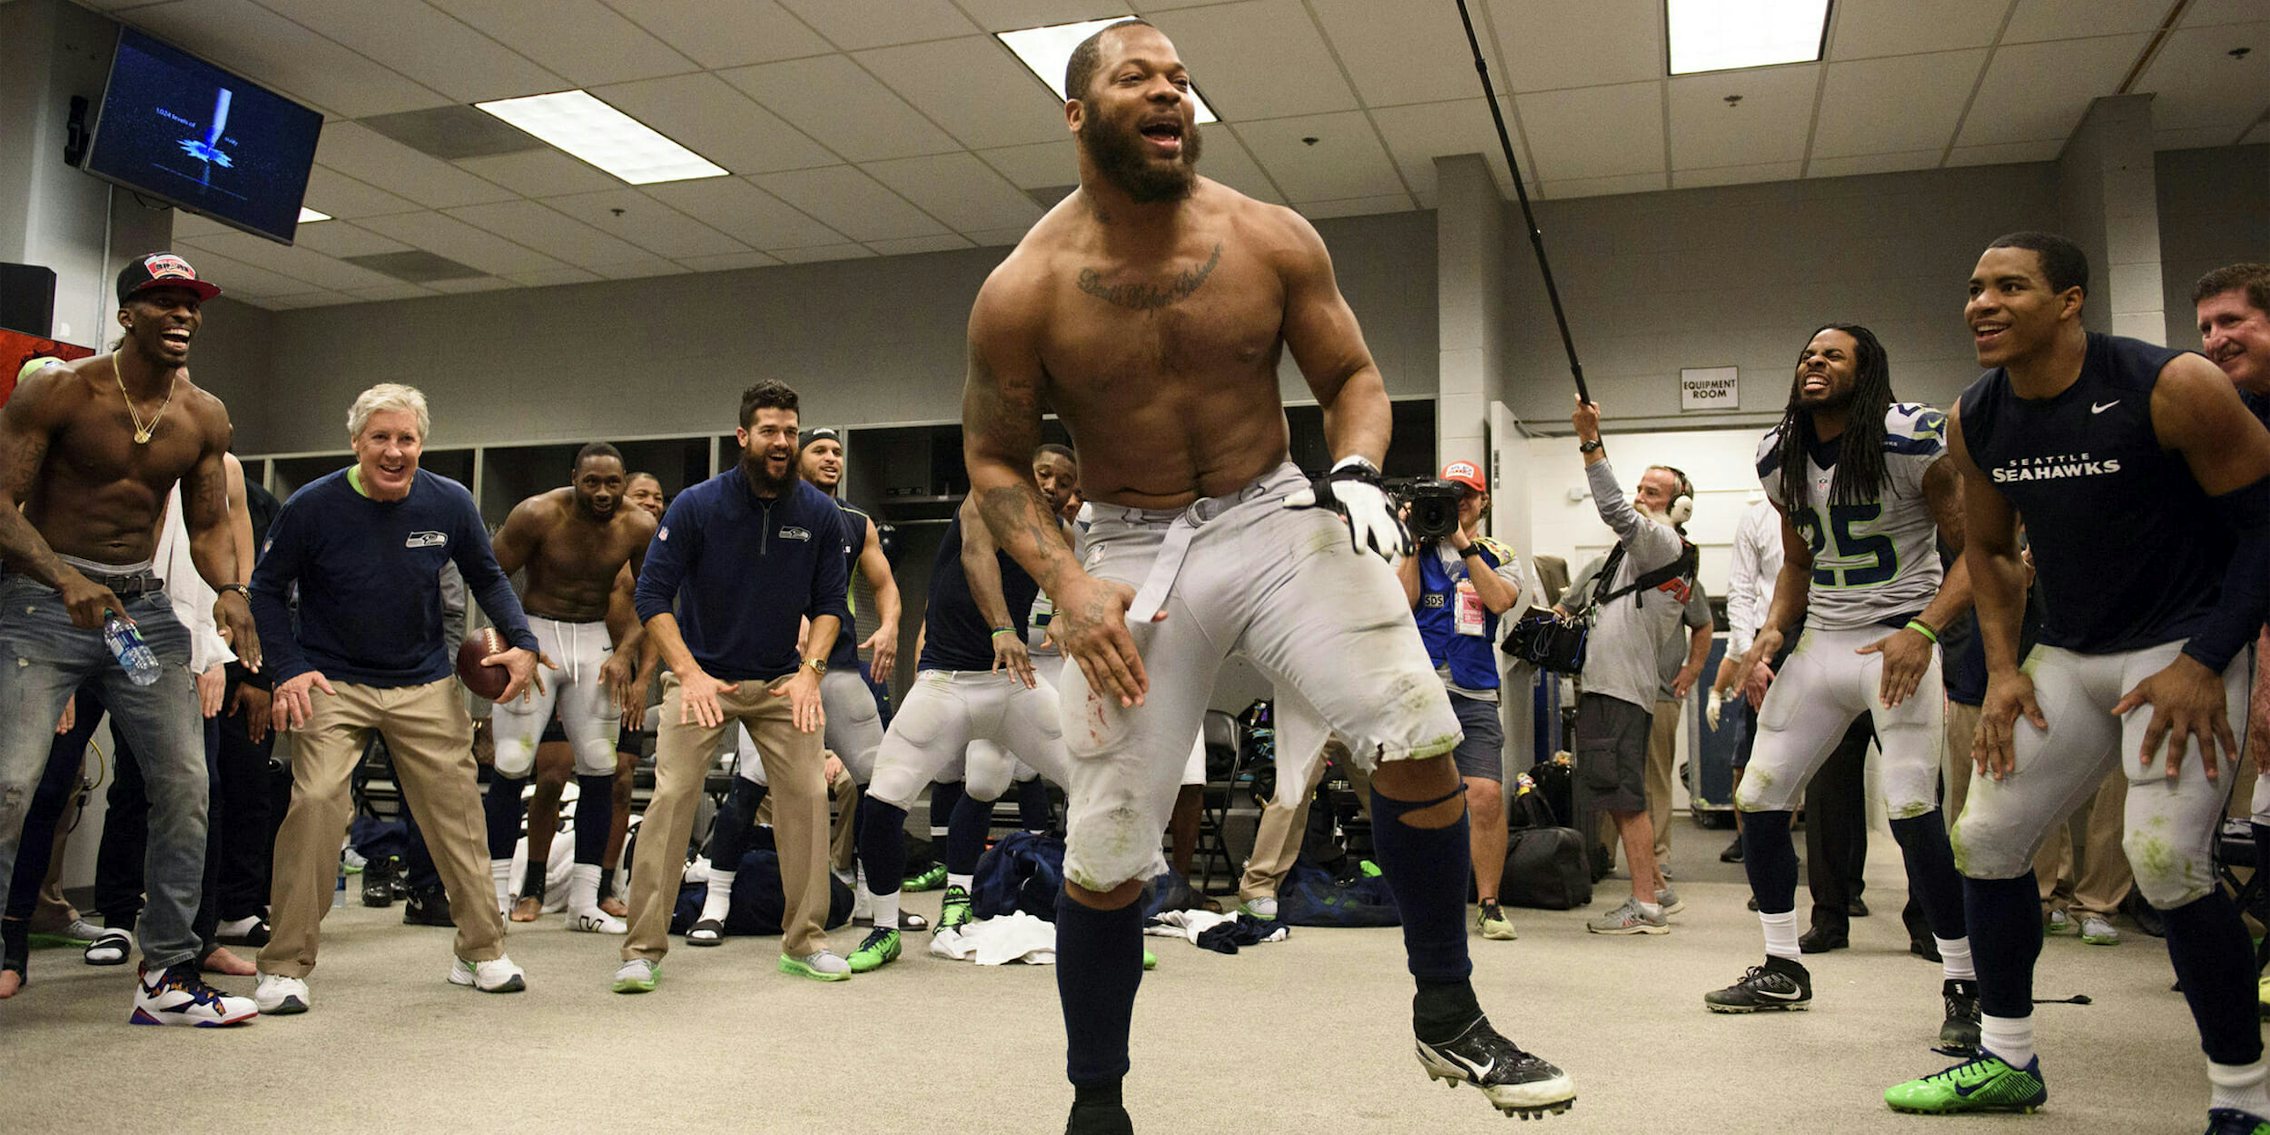 Defensive end Michael Bennett leads the team in the now-traditional post-victory dance in the locker room.